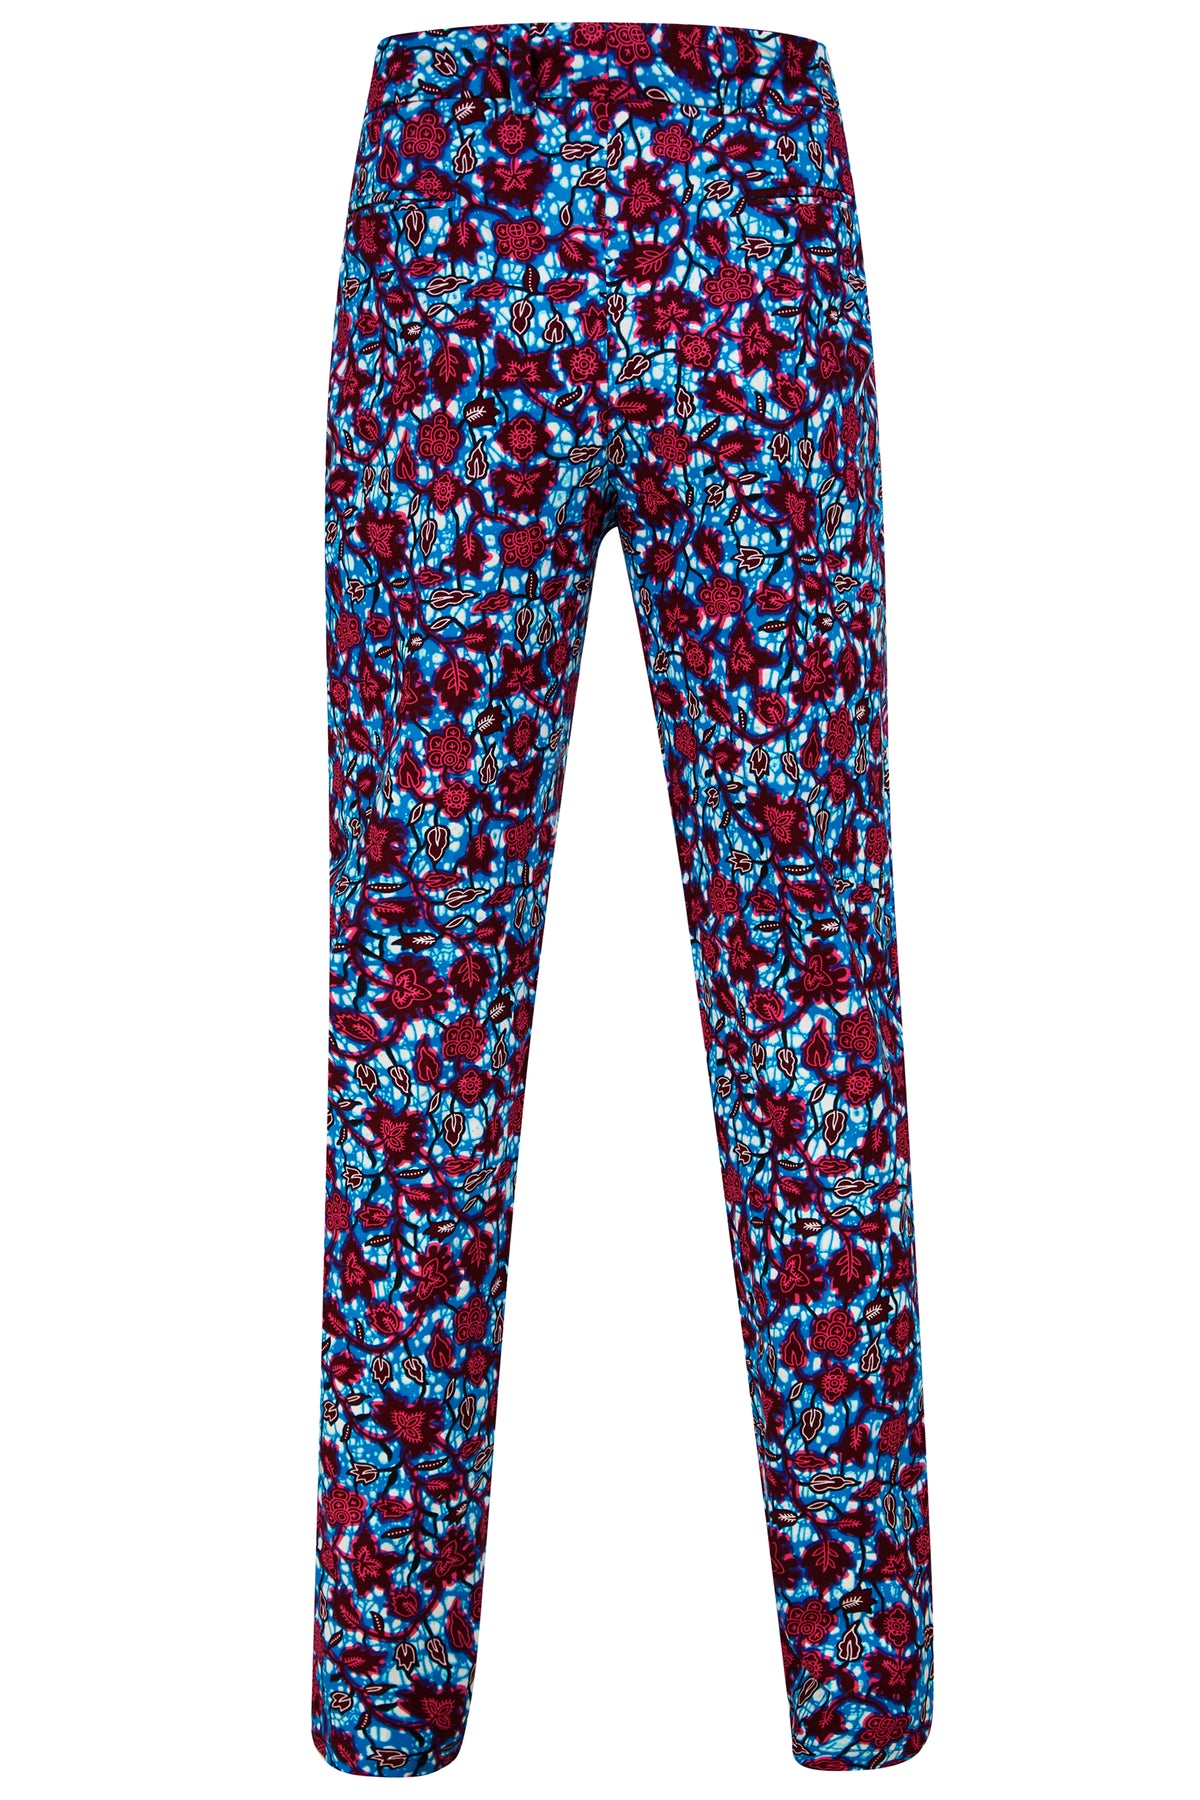 Osei straight leg trousers-Blue florals - OHEMA OHENE AFRICAN INSPIRED FASHION